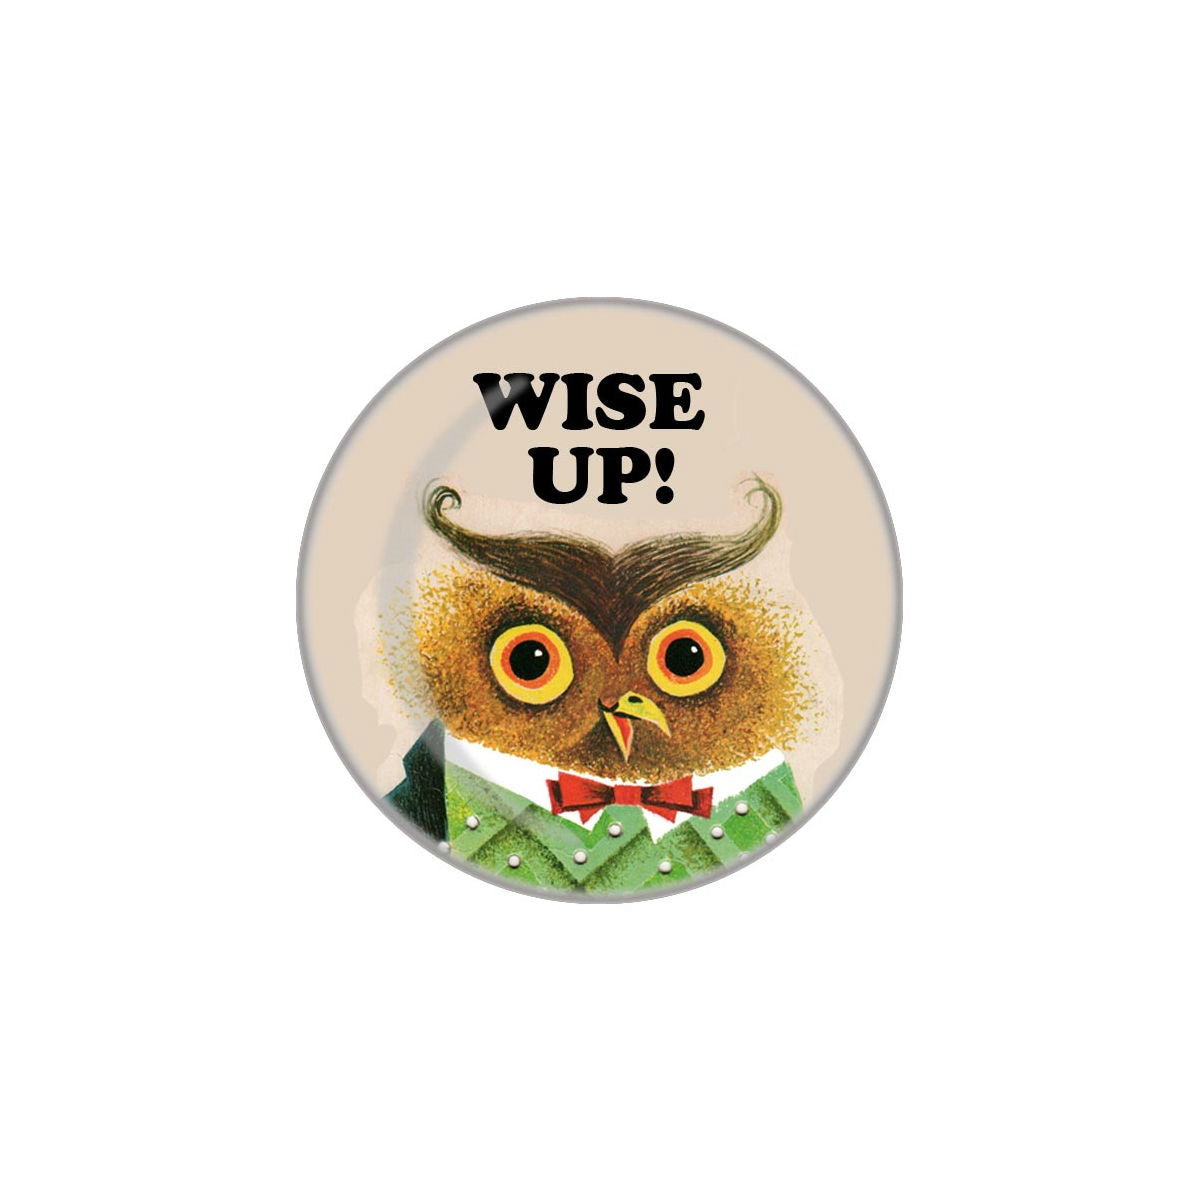 1" size round metal button depicting an illustrated bow-tied owl underneath the words "WISE UP!"